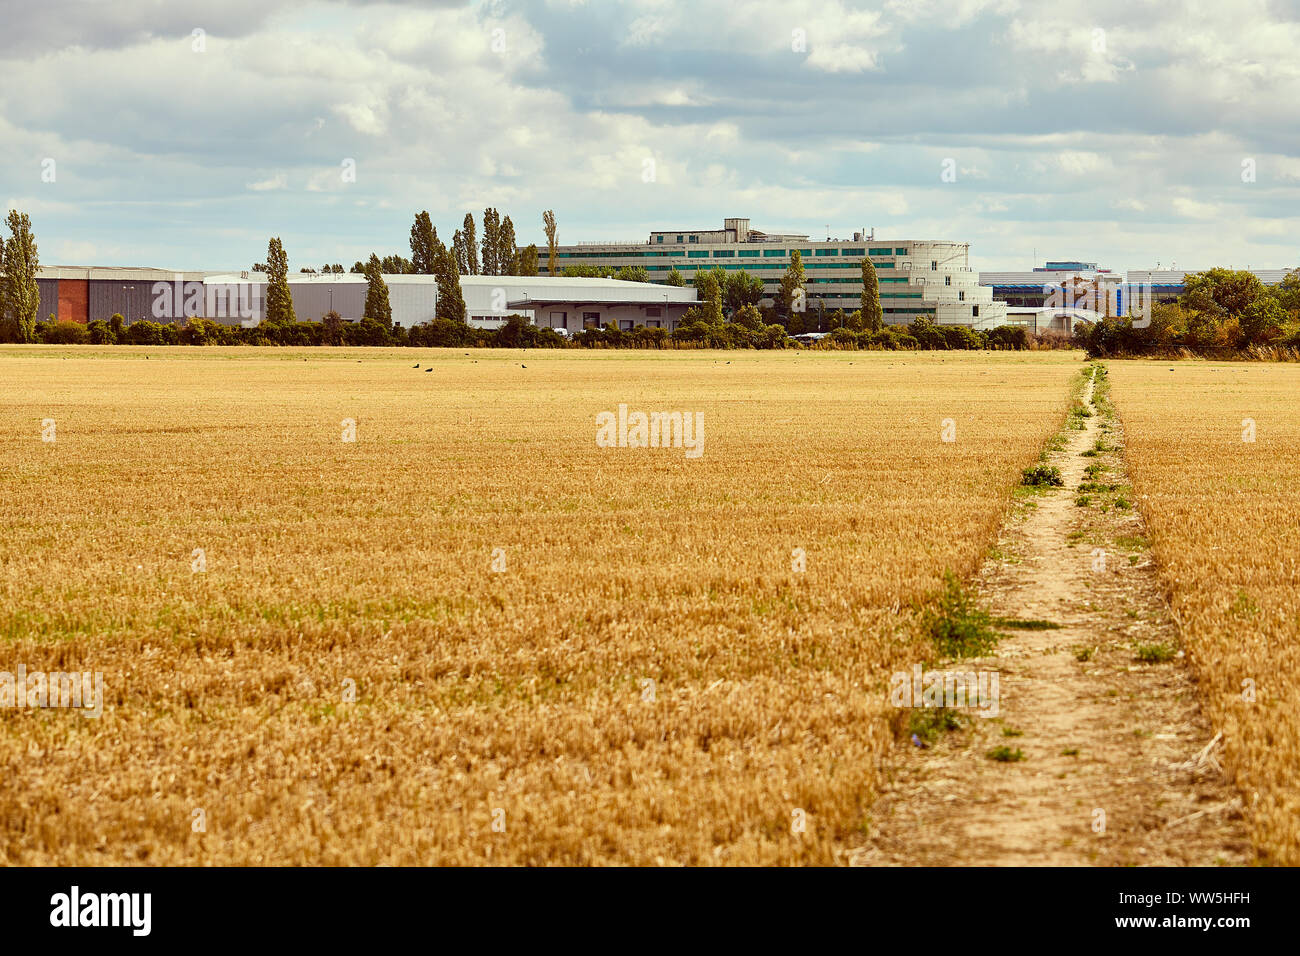 London, U.K. - Sept 1, 2019: A field at Harmondsworth looking towards the Hyatt Place hotel. Plans for a third runway at Heathrow would cover the area seen. Stock Photo